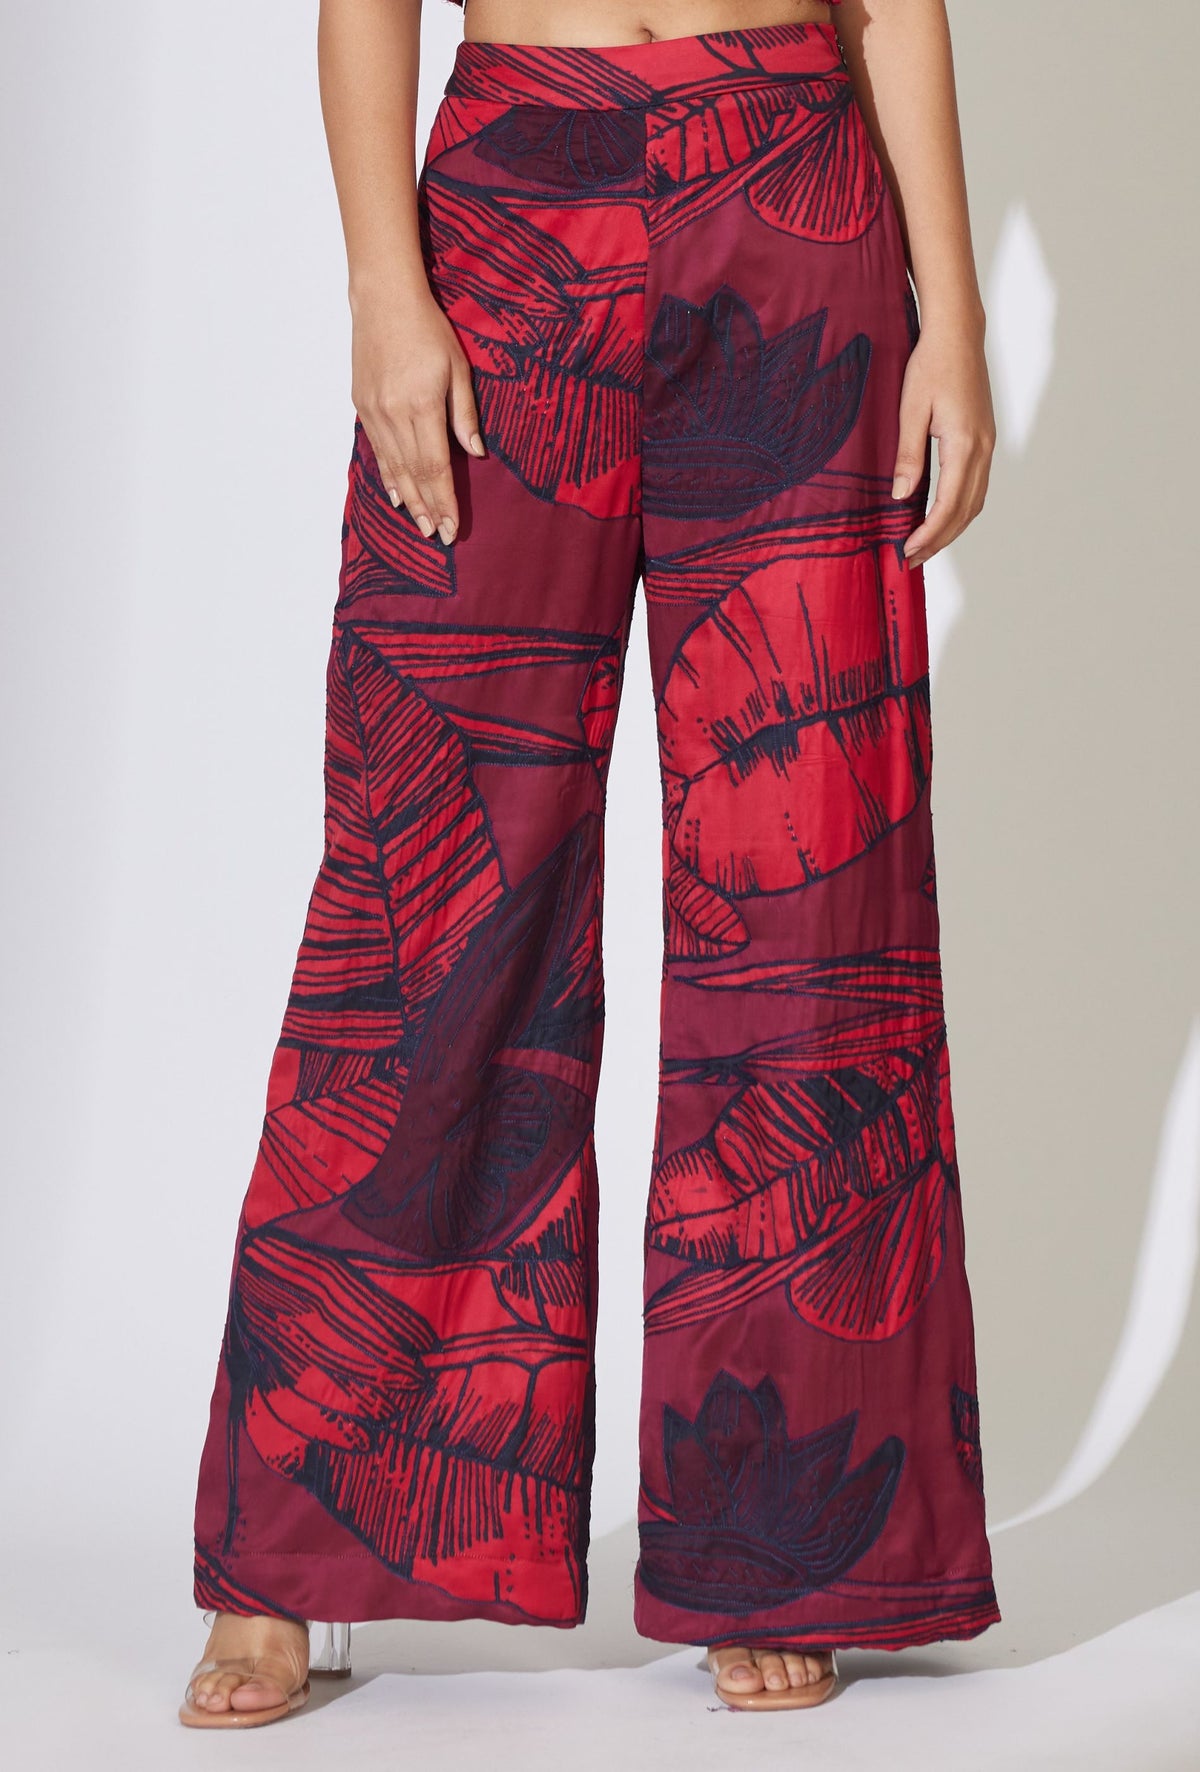 RED AND MAROON FLORAL EMBROIDERED PANTS